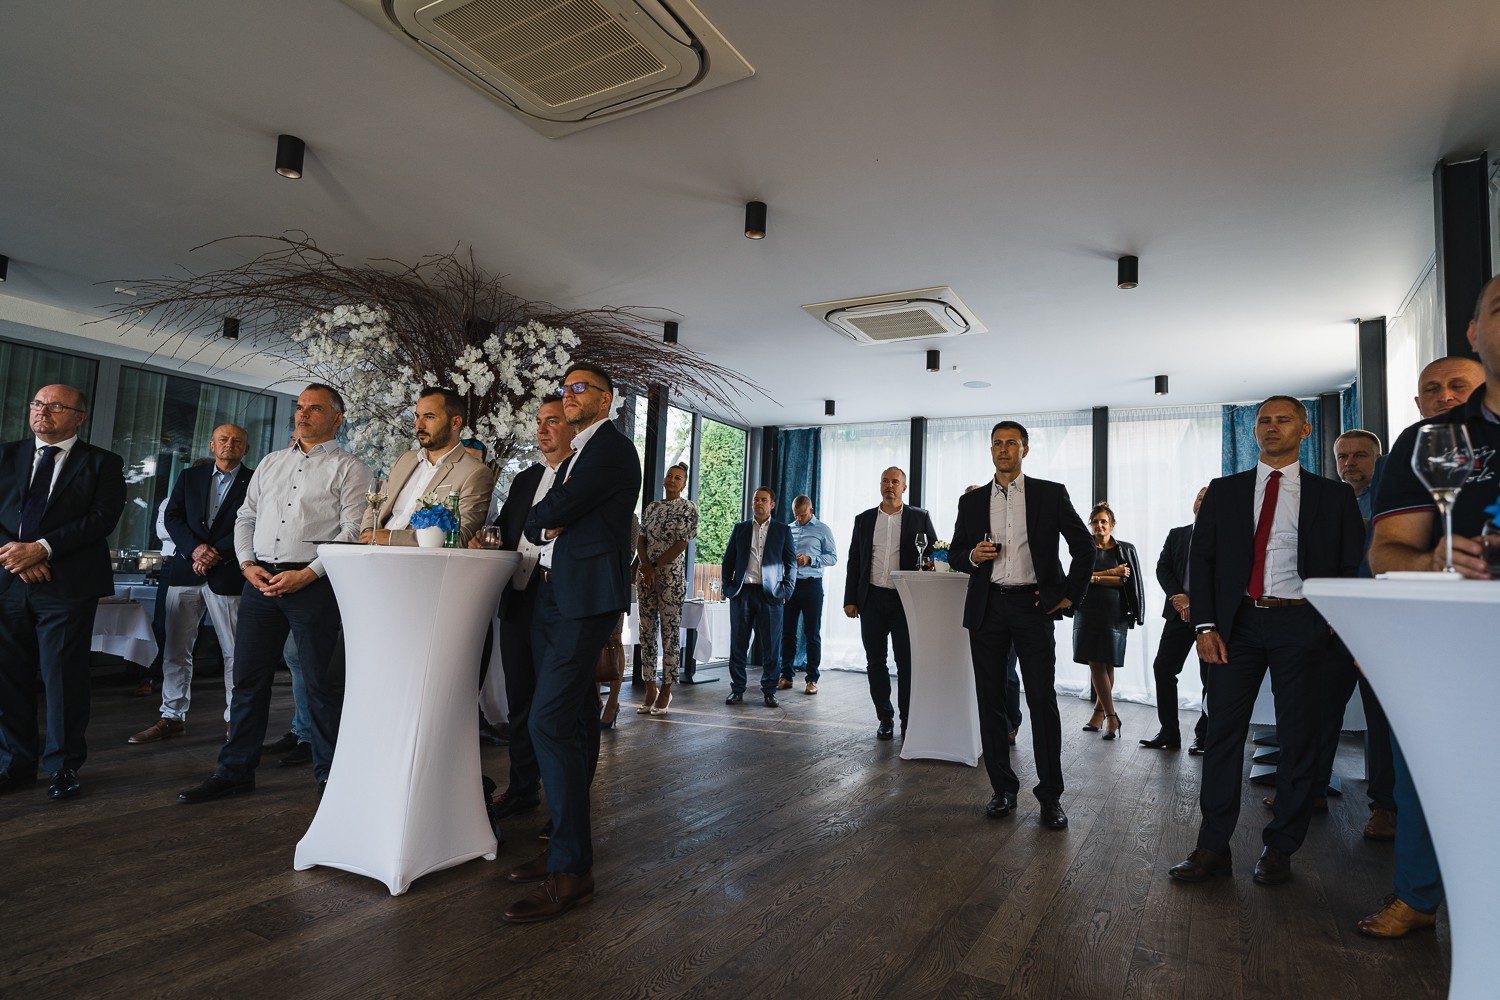 Meeting of members of the Association of Leasing Companies of the Slovak Republic